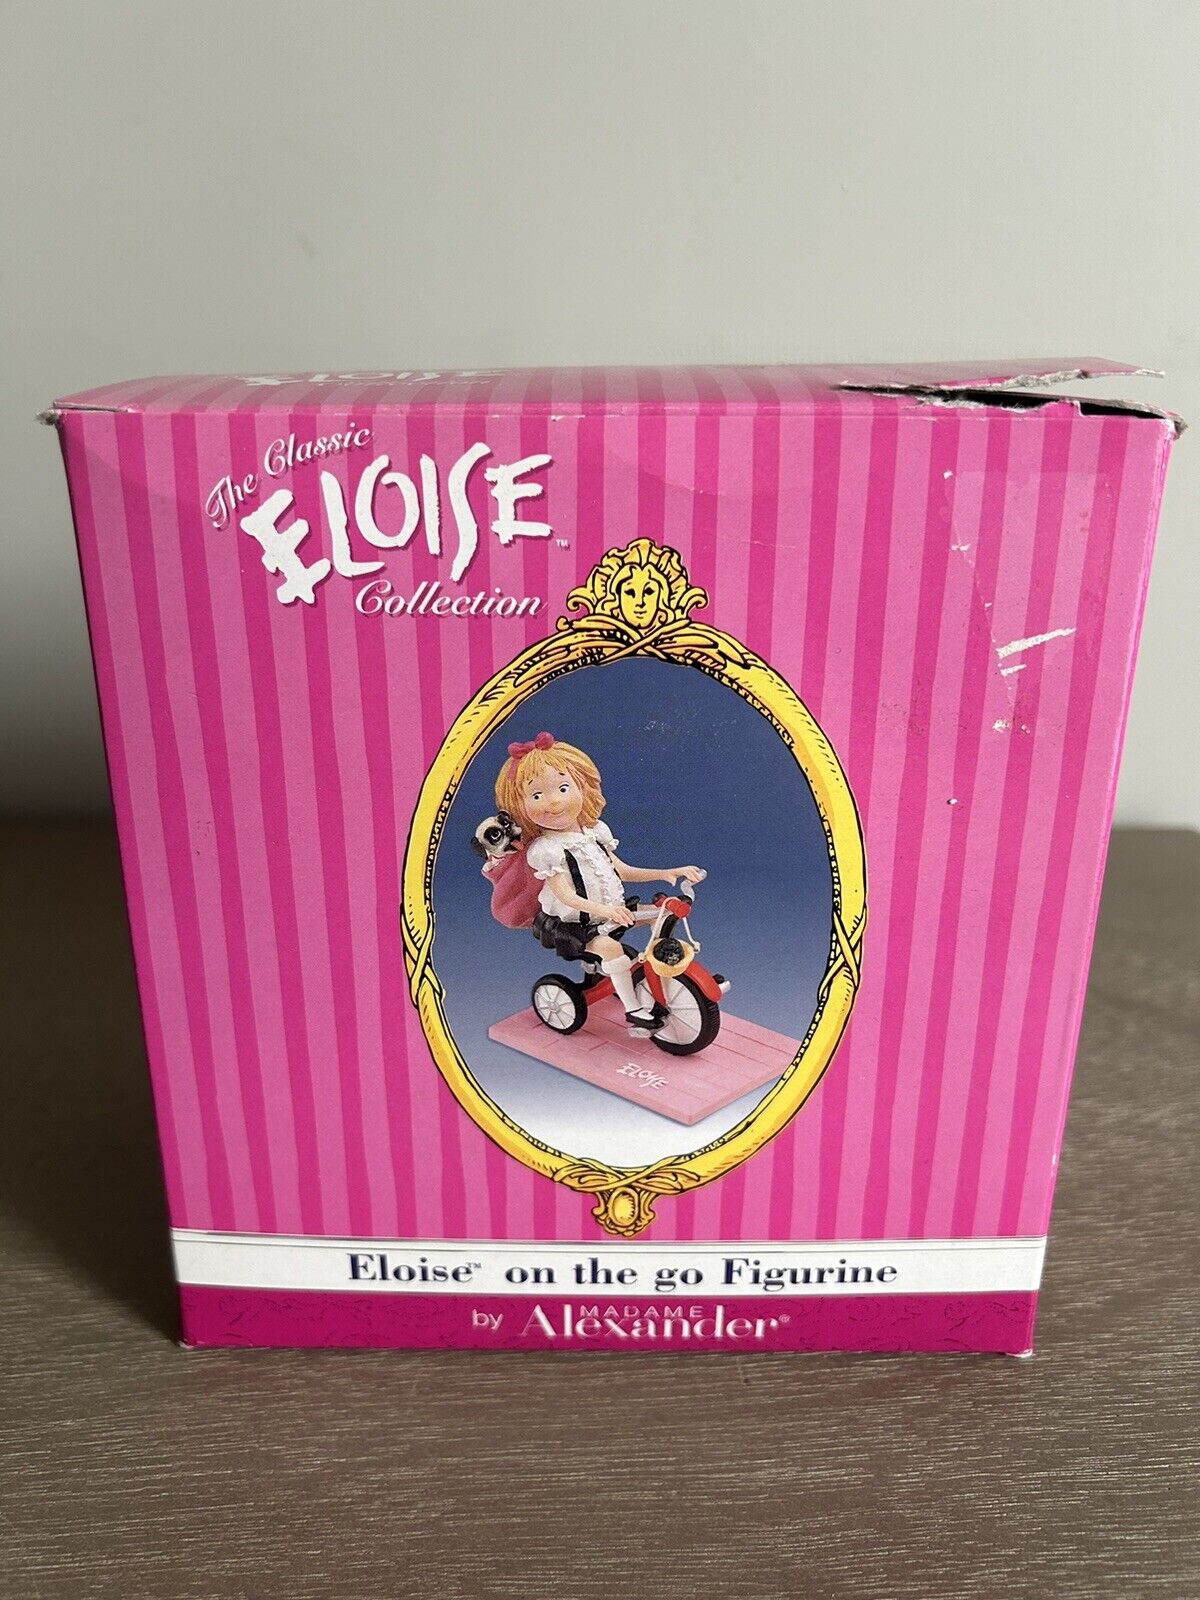 MADAME ALEXANDER CLASSIC COLLECTION ELOISE ON THE GO FIGURINE 2001